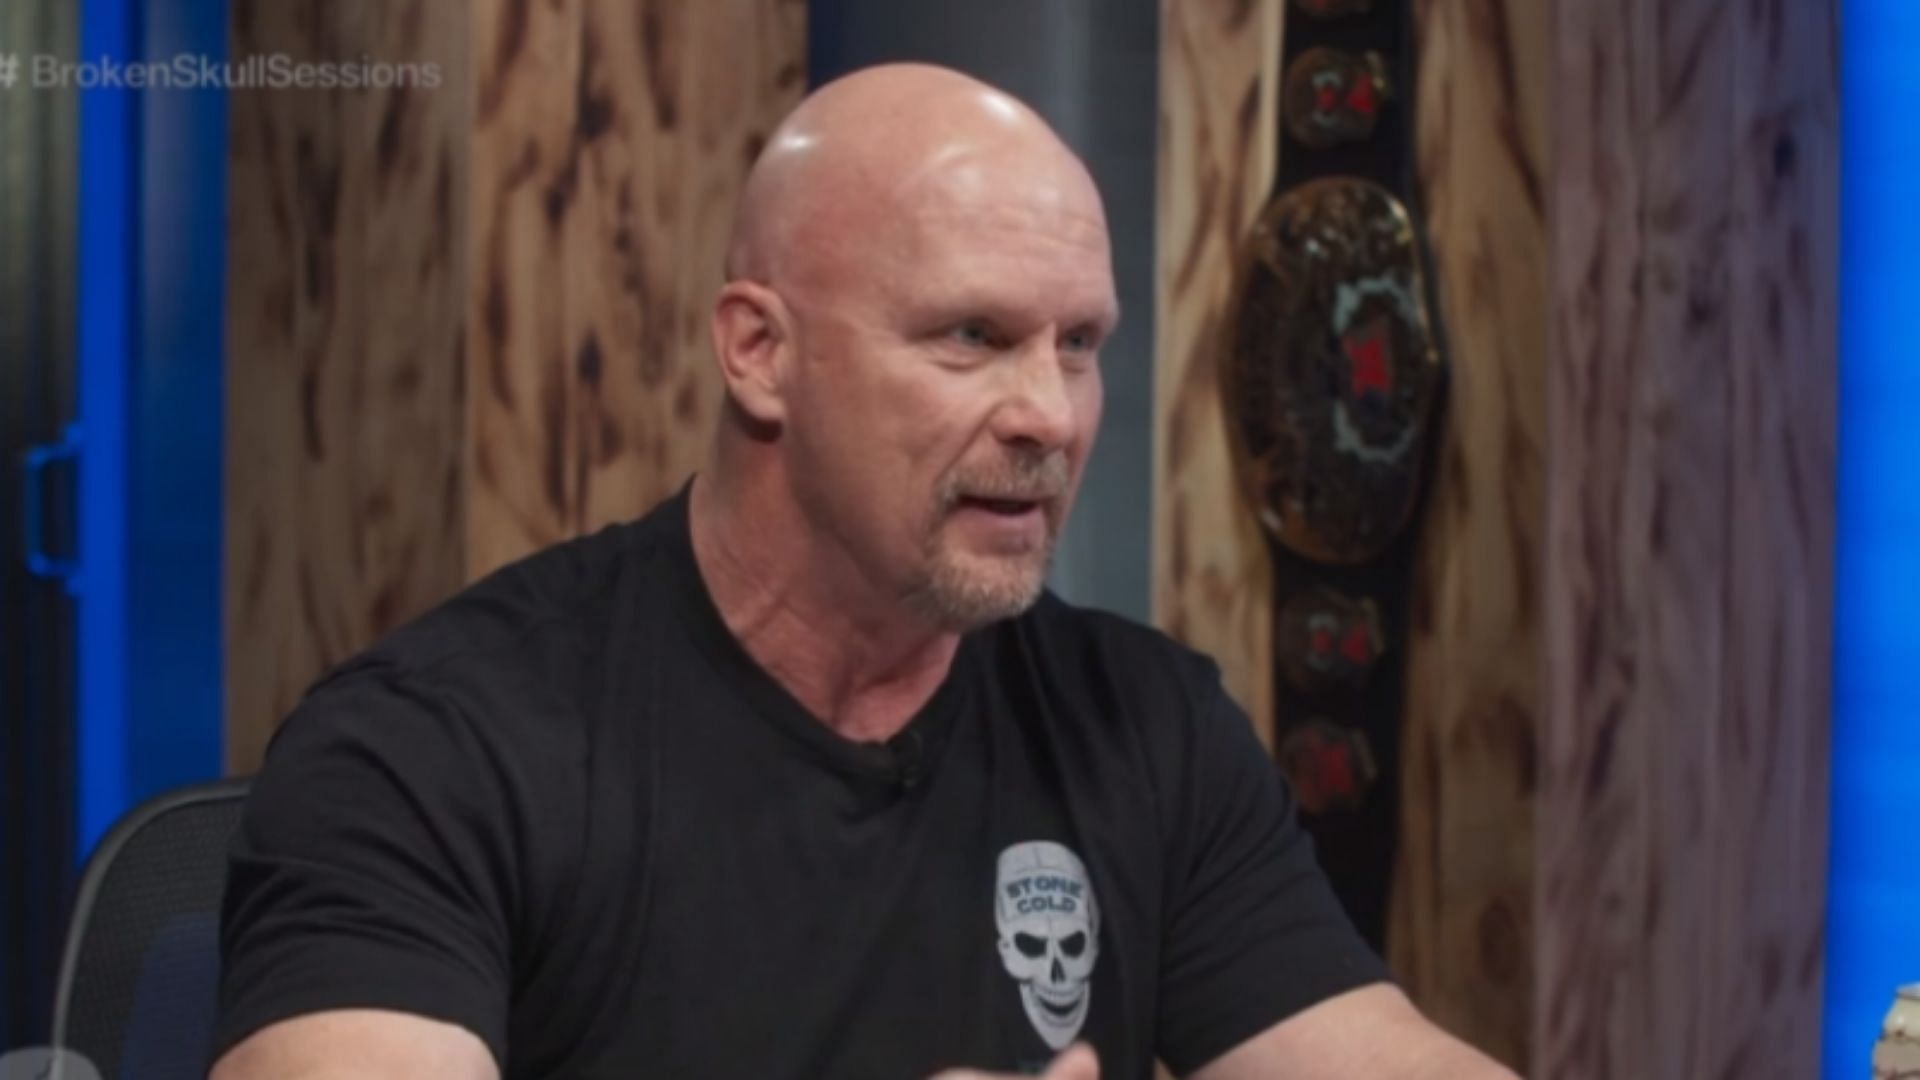 Steve Austin joined the WWE Hall of Fame in 2009